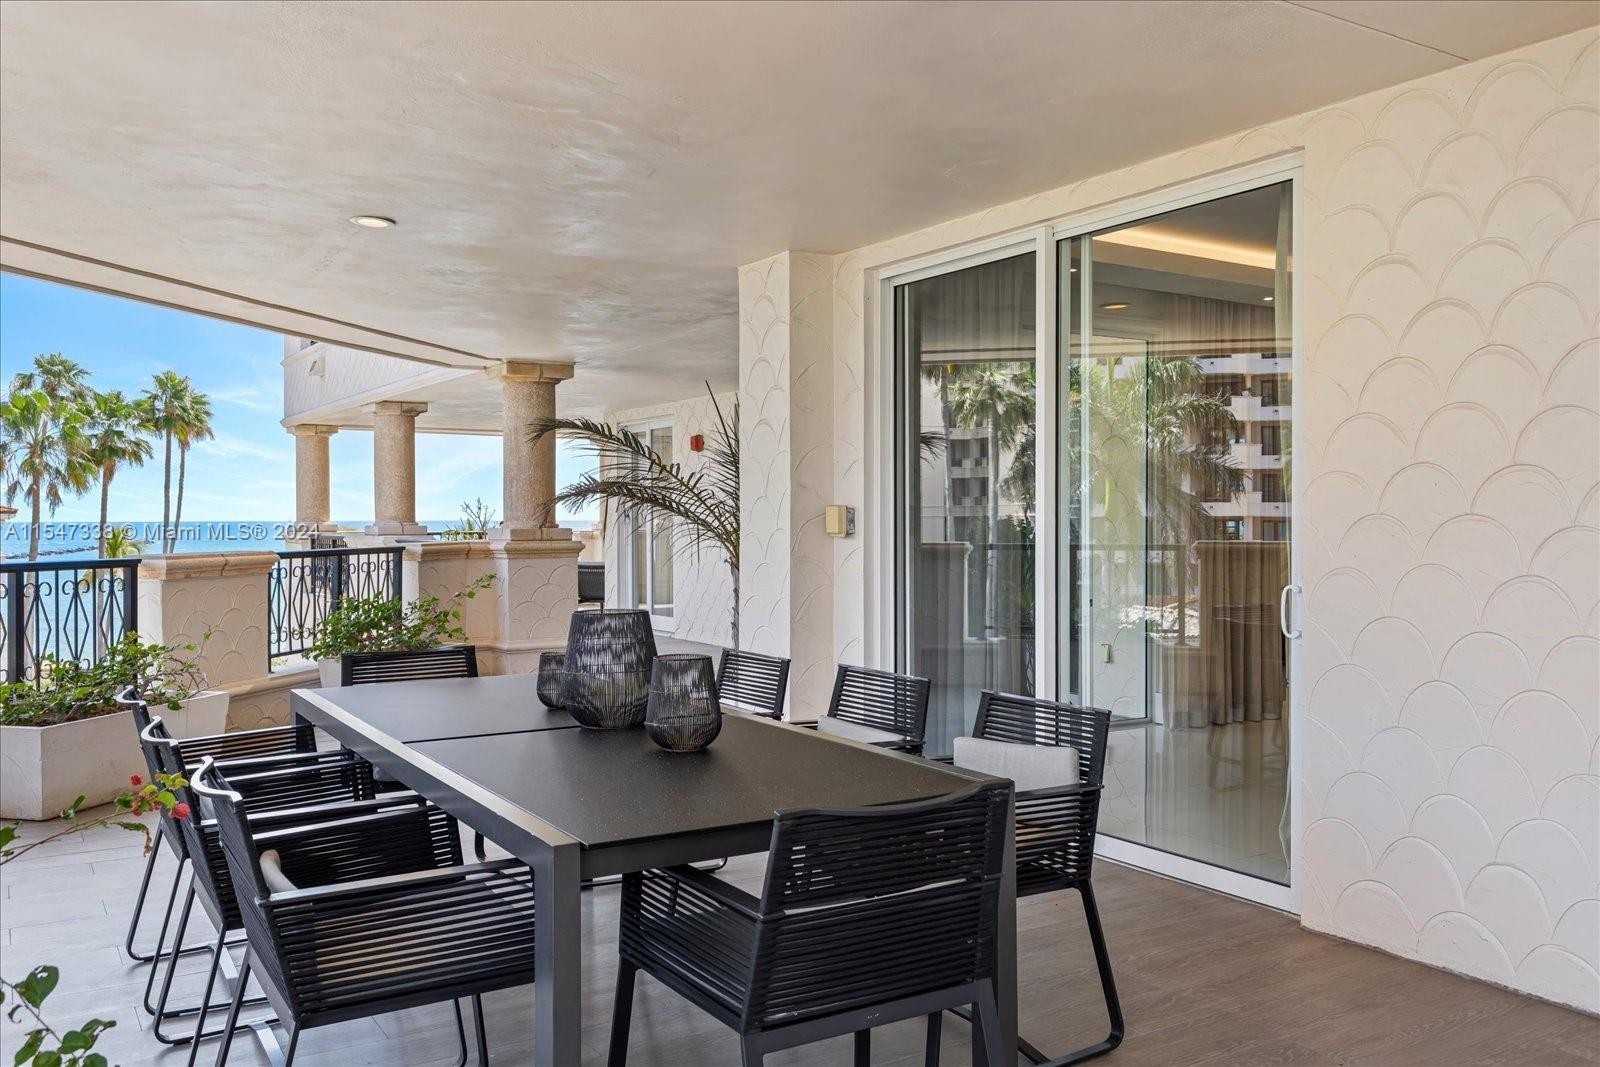 31. 7431 Fisher Island Dr